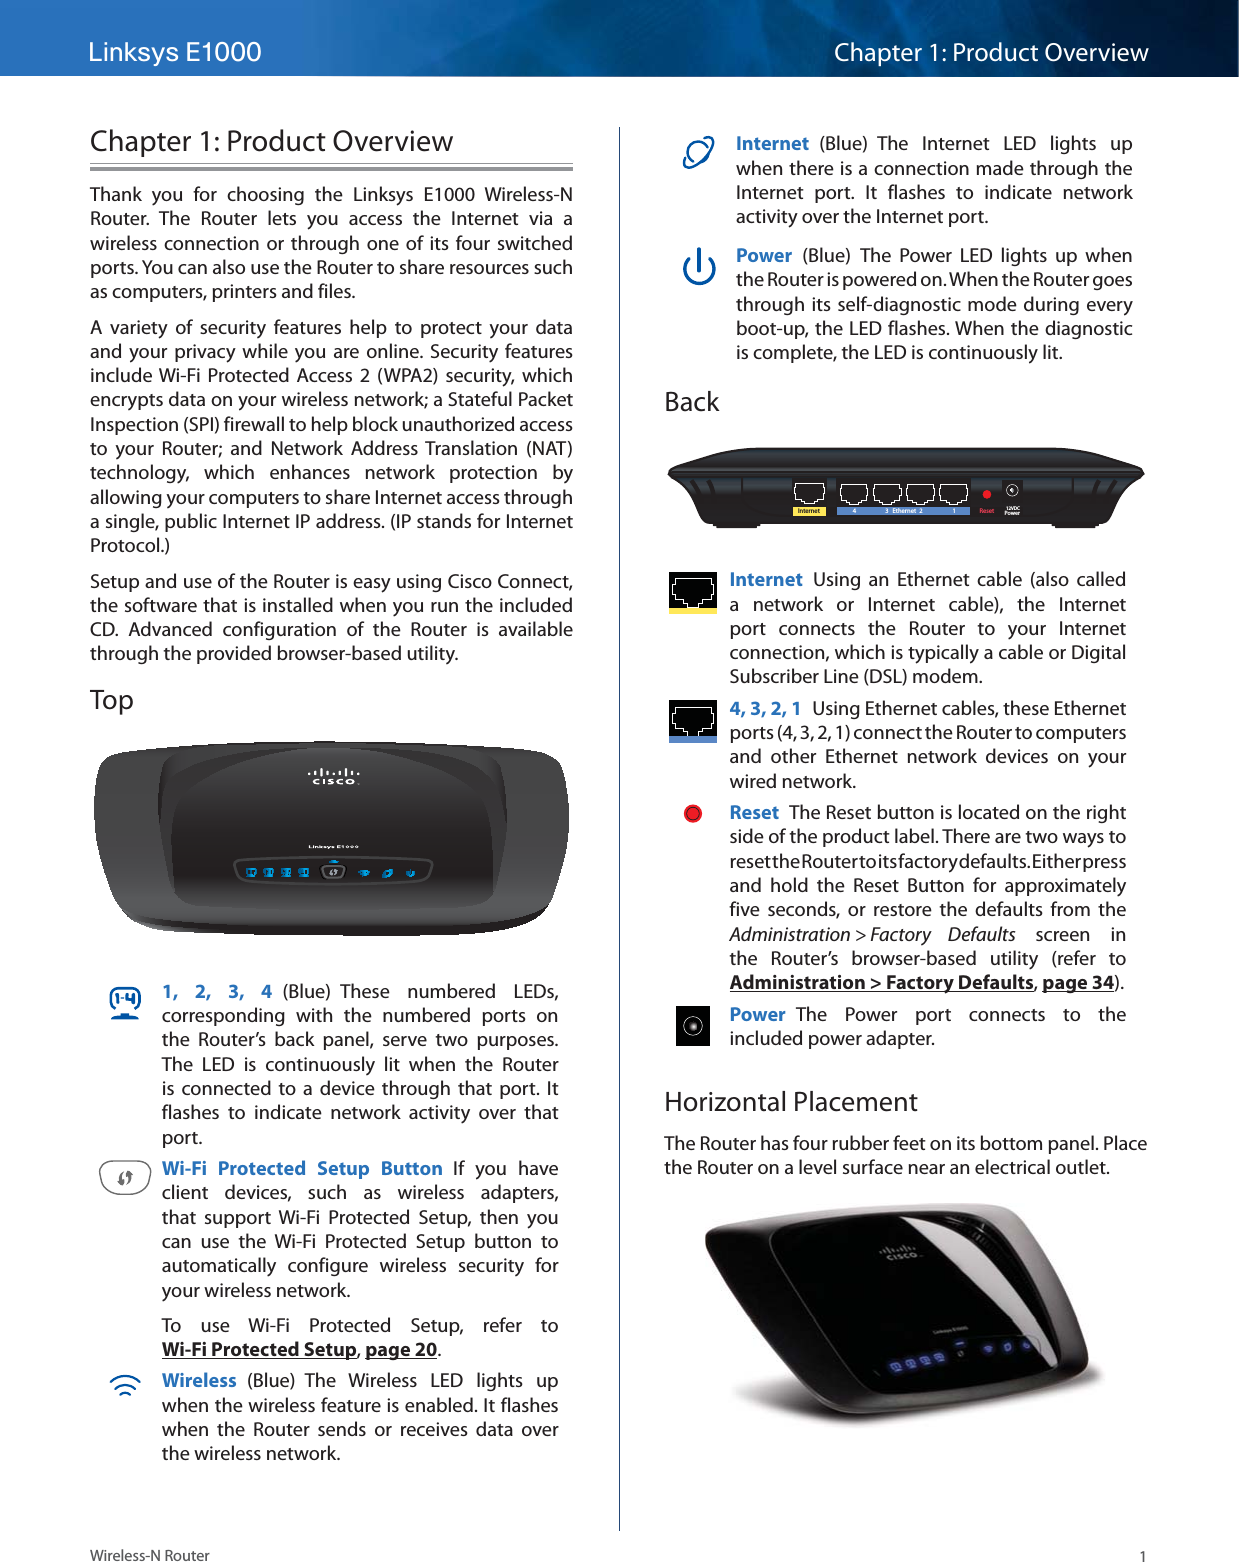 Linksys E1000 Chapter 1: Product Overview1Wireless-N RouterChapter 1: Product OverviewThank you for choosing the Linksys E1000 Wireless-N Router. The Router lets you access the Internet via a wireless connection or through one of its four switched ports. You can also use the Router to share resources such as computers, printers and files. A variety of security features help to protect your data and your privacy while you are online. Security features include Wi-Fi Protected Access 2 (WPA2) security, which encrypts data on your wireless network; a Stateful Packet Inspection (SPI) firewall to help block unauthorized access to your Router; and Network Address Translation (NAT) technology, which enhances network protection by allowing your computers to share Internet access through a single, public Internet IP address. (IP stands for Internet Protocol.)Setup and use of the Router is easy using Cisco Connect, the software that is installed when you run the included CD. Advanced configuration of the Router is available through the provided browser-based utility.Top1, 2, 3, 4 (Blue) These numbered LEDs, corresponding with the numbered ports on the Router’s back panel, serve two purposes. The LED is continuously lit when the Router is connected to a device through that port. It flashes to indicate network activity over that port. Wi-Fi Protected Setup Button If you have client devices, such as wireless adapters, that support Wi-Fi Protected Setup, then you can use the Wi-Fi Protected Setup button to automatically configure wireless security for your wireless network.To use Wi-Fi Protected Setup, refer to Wi-Fi Protected Setup, page 20.Wireless  (Blue) The Wireless LED lights up when the wireless feature is enabled. It flashes when the Router sends or receives data over the wireless network.Internet  (Blue) The Internet LED lights up when there is a connection made through the Internet port. It flashes to indicate network activity over the Internet port. Power  (Blue) The Power LED lights up when the Router is powered on. When the Router goes through its self-diagnostic mode during every boot-up, the LED flashes. When the diagnostic is complete, the LED is continuously lit.BackInternet Ethernet43 21Reset Power12VDCInternet  Using an Ethernet cable (also called a network or Internet cable), the Internet port connects the Router to your Internet connection, which is typically a cable or Digital Subscriber Line (DSL) modem. 4, 3, 2, 1  Using Ethernet cables, these Ethernet ports (4, 3, 2, 1) connect the Router to computers and other Ethernet network devices on your wired network. Reset  The Reset button is located on the right side of the product label. There are two ways to reset the Router to its factory defaults. Either press and hold the Reset Button for approximately five seconds, or restore the defaults from the Administration &gt; Factory  Defaults screen in the Router’s browser-based utility (refer to Administration &gt; Factory Defaults, page 34).Power  The Power port connects to the included power adapter.Horizontal PlacementThe Router has four rubber feet on its bottom panel. Place the Router on a level surface near an electrical outlet.